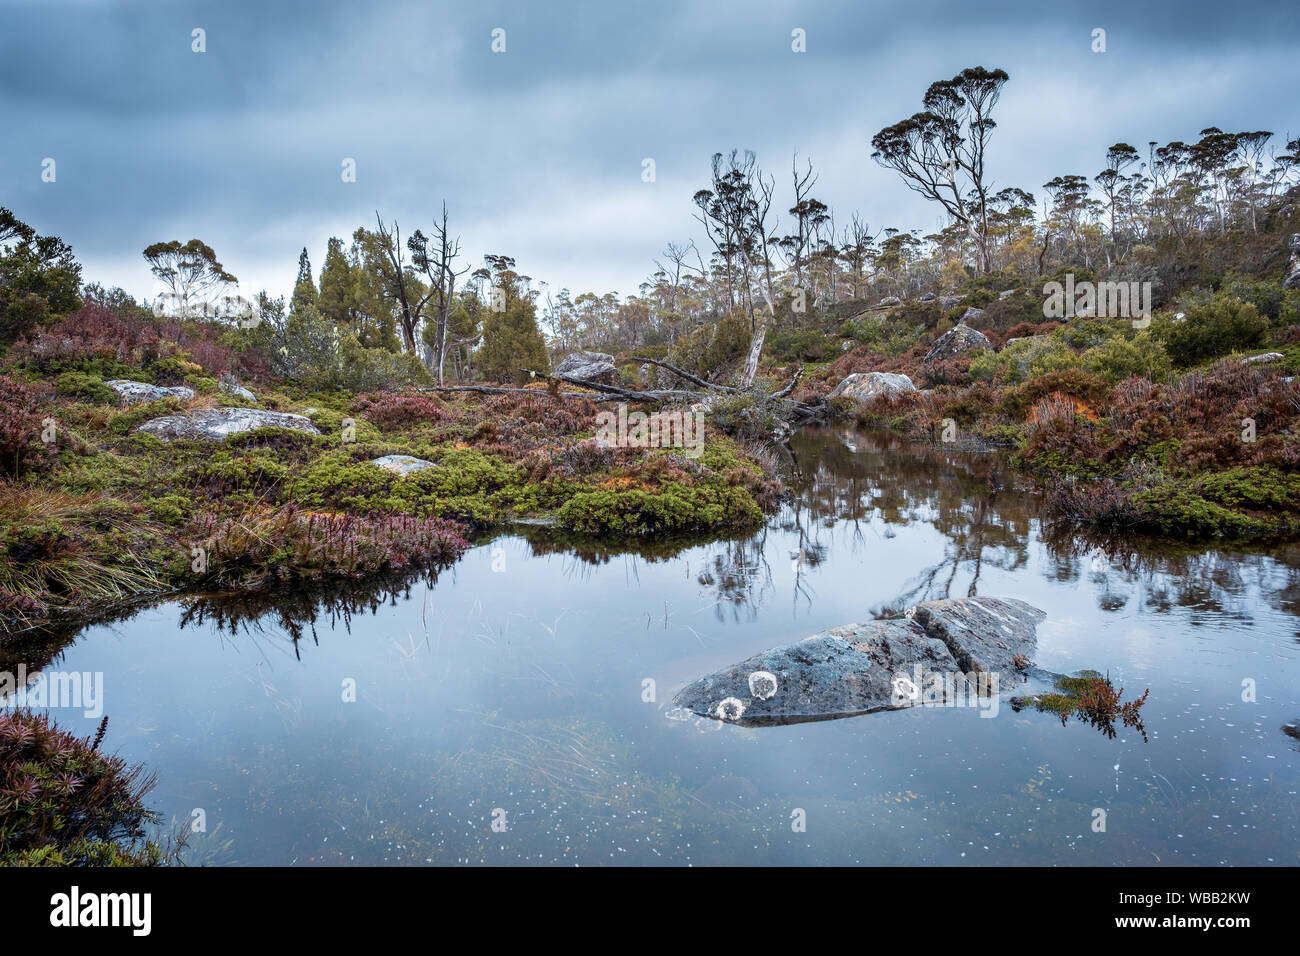 Pond in swamp with endemic plants and trees under cloudy sky in Walls of Jerusalem National Park, Tasmania Australia Stock Photo